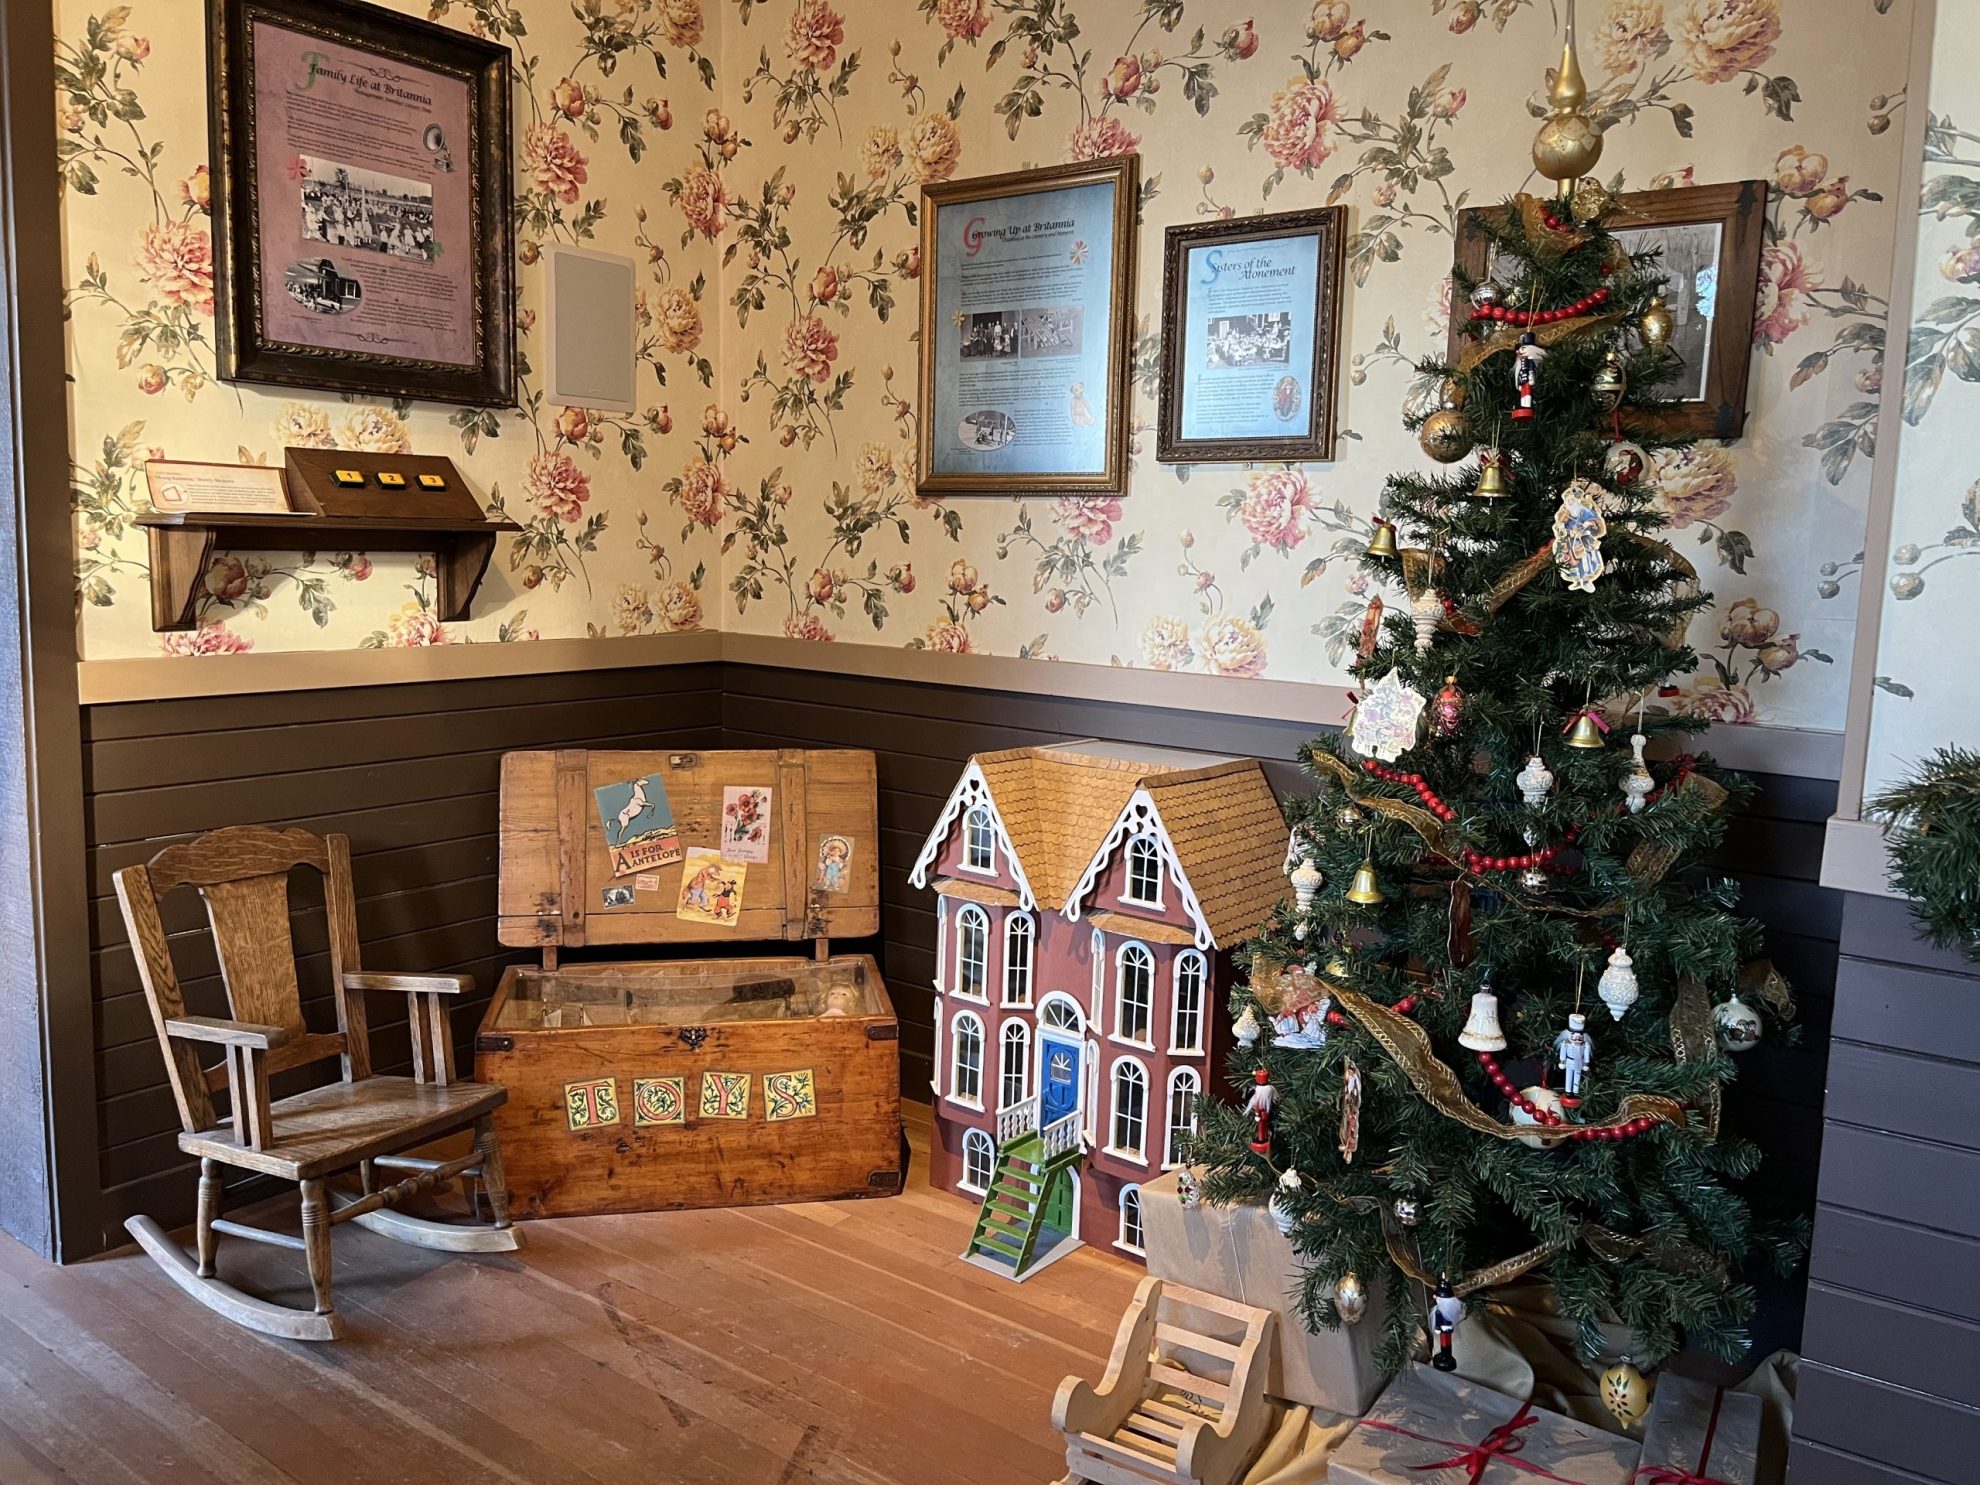 Historic display of living room with Christmas tree and doll house